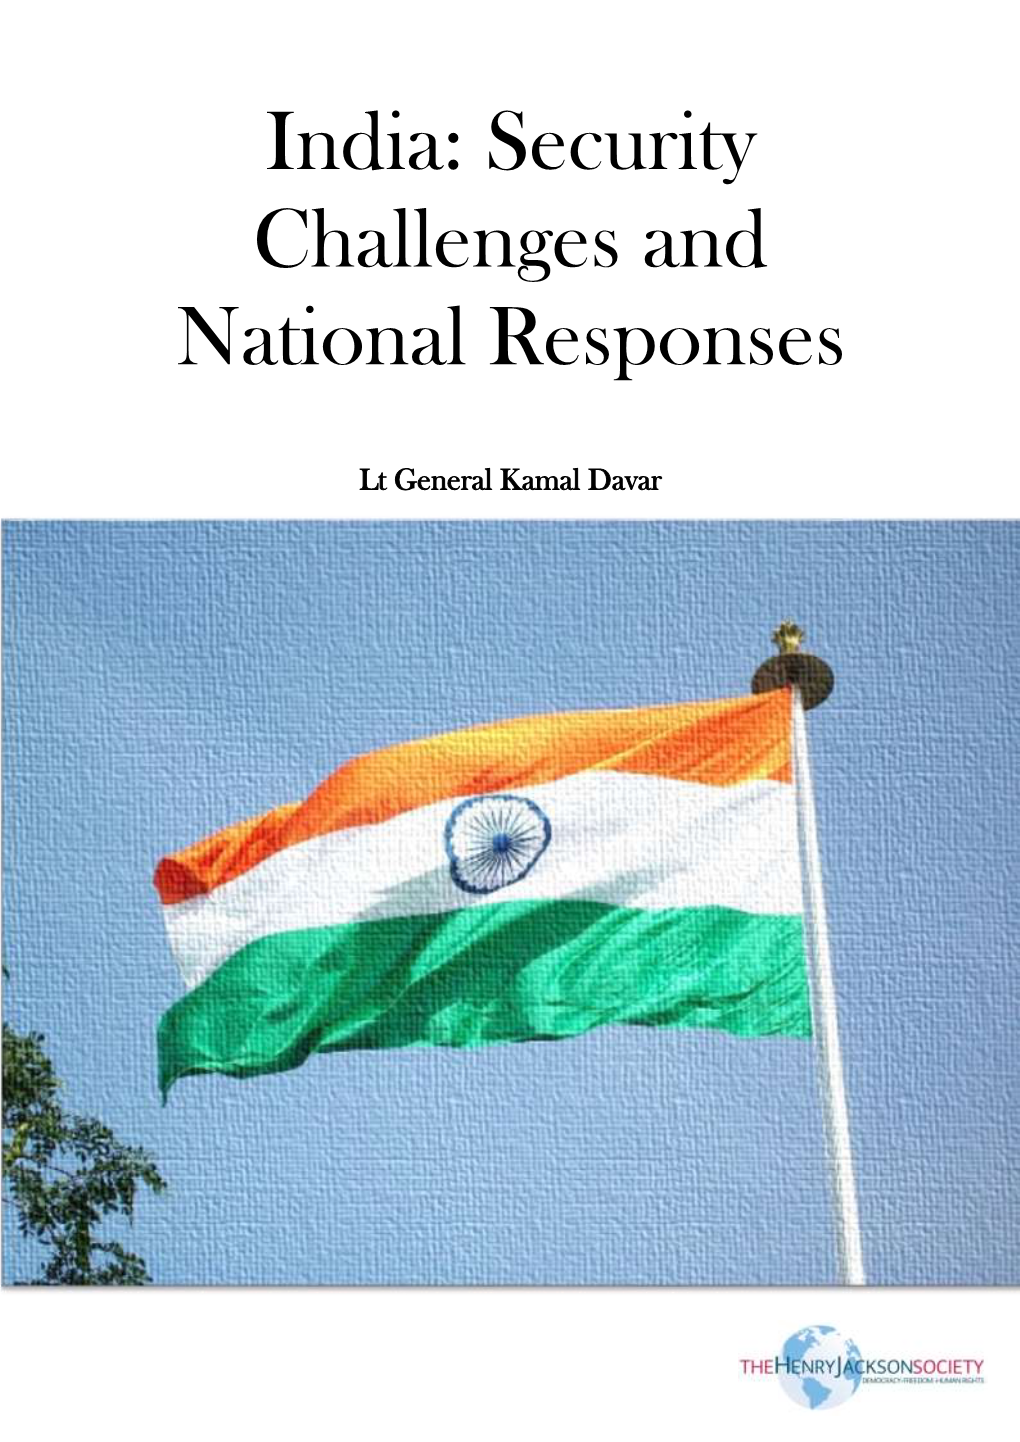 India: Security Challenges and National Responses